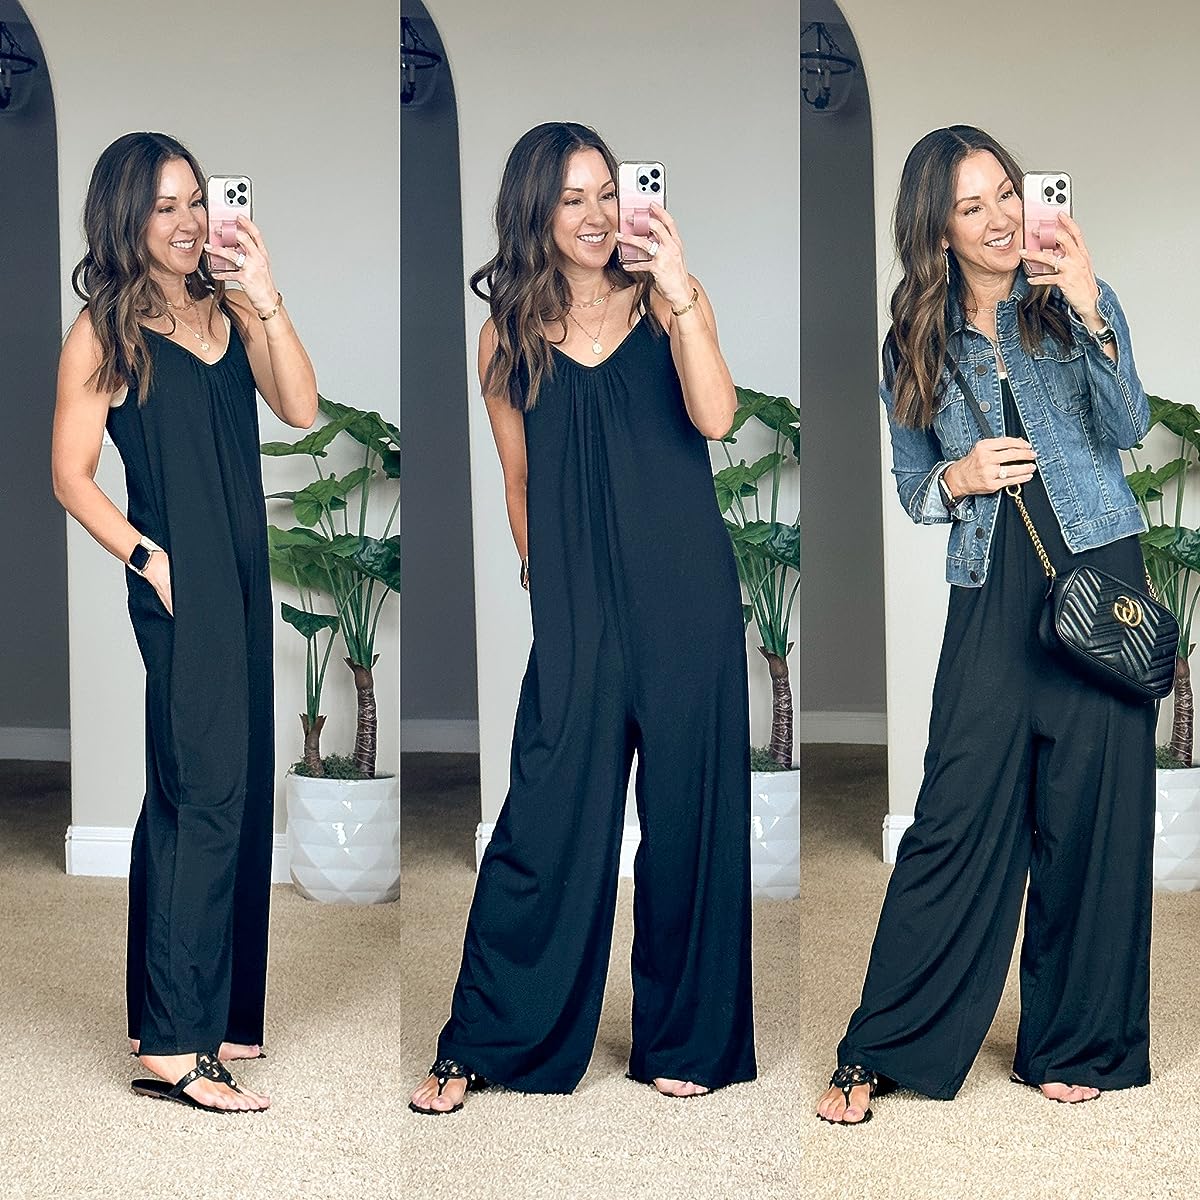 Summer to Fall Fashion Pieces | #jumpsuit #jeanjacket #amazon #fashion #fall #summer #casualoutfit #gold #jewelry #sandals #earlyfall